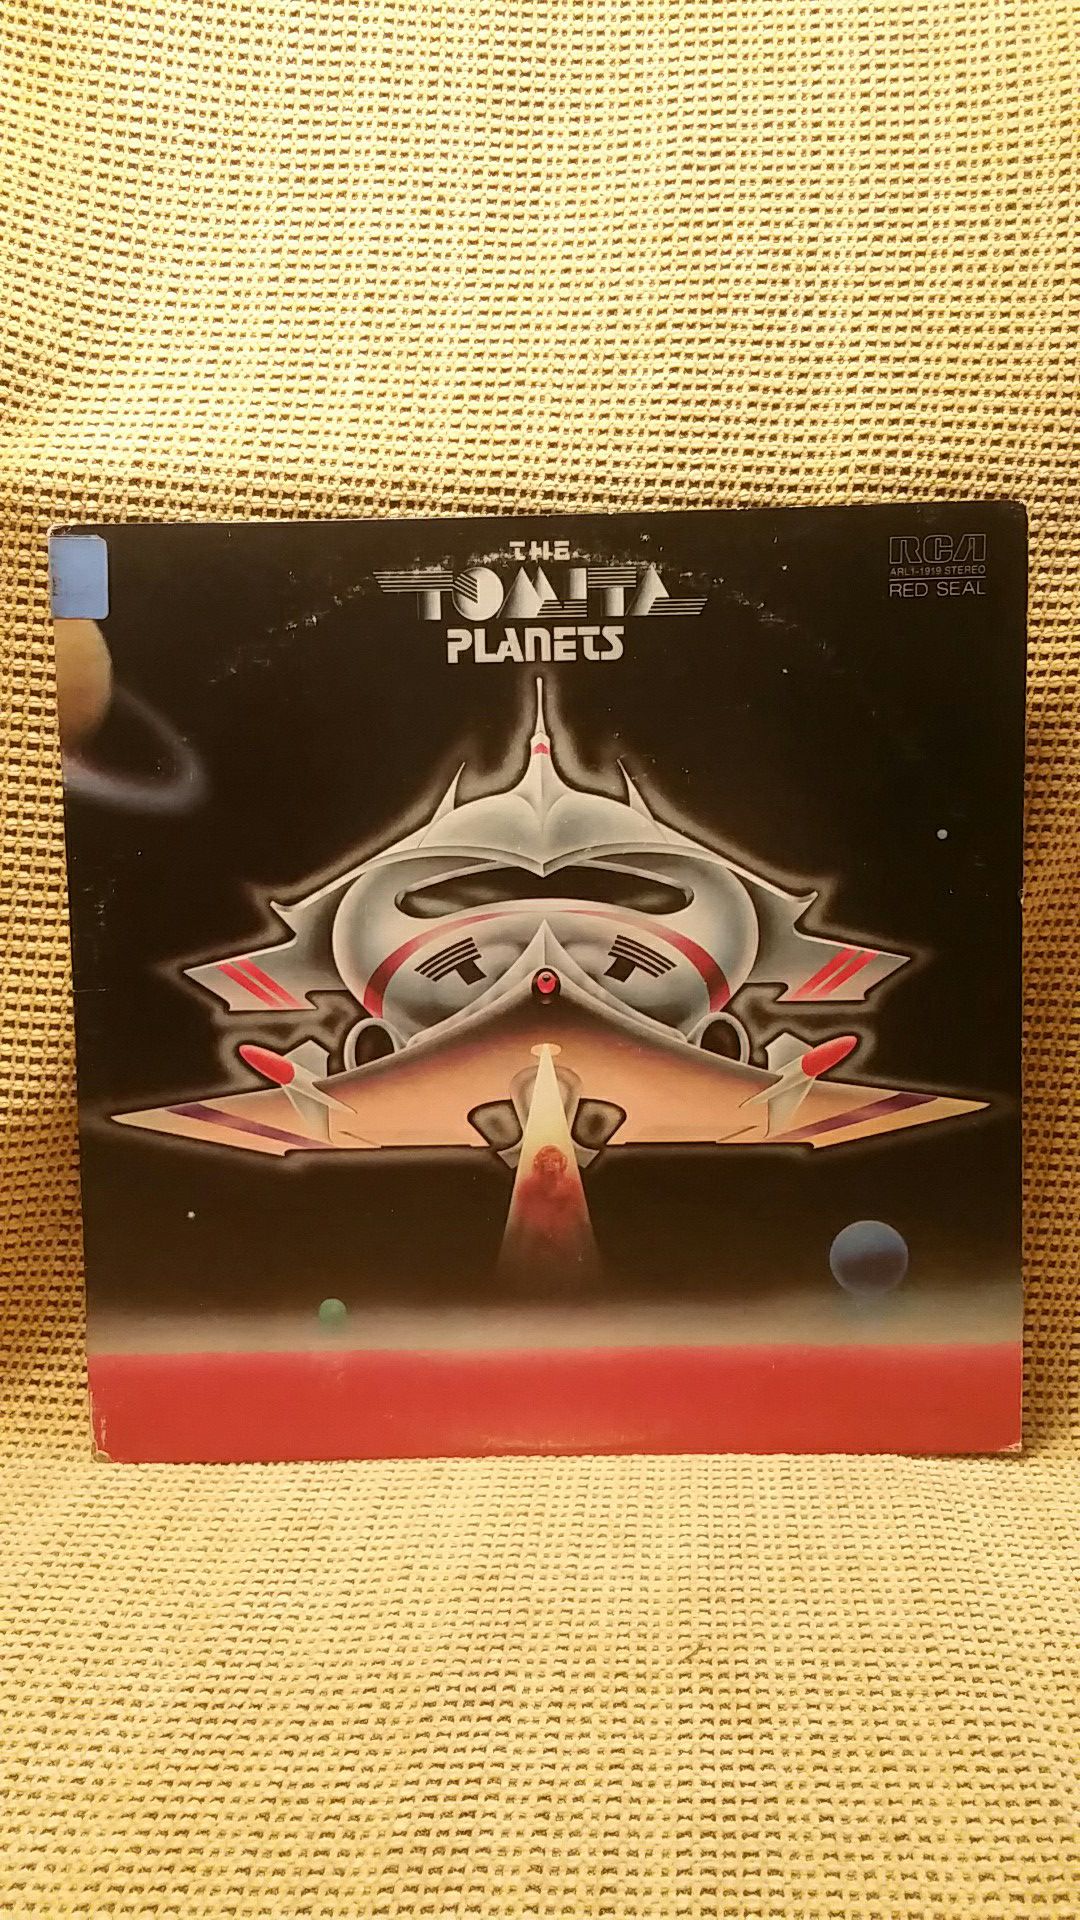 Holst "The Planets"- Isao Tomita vinyl record electronic